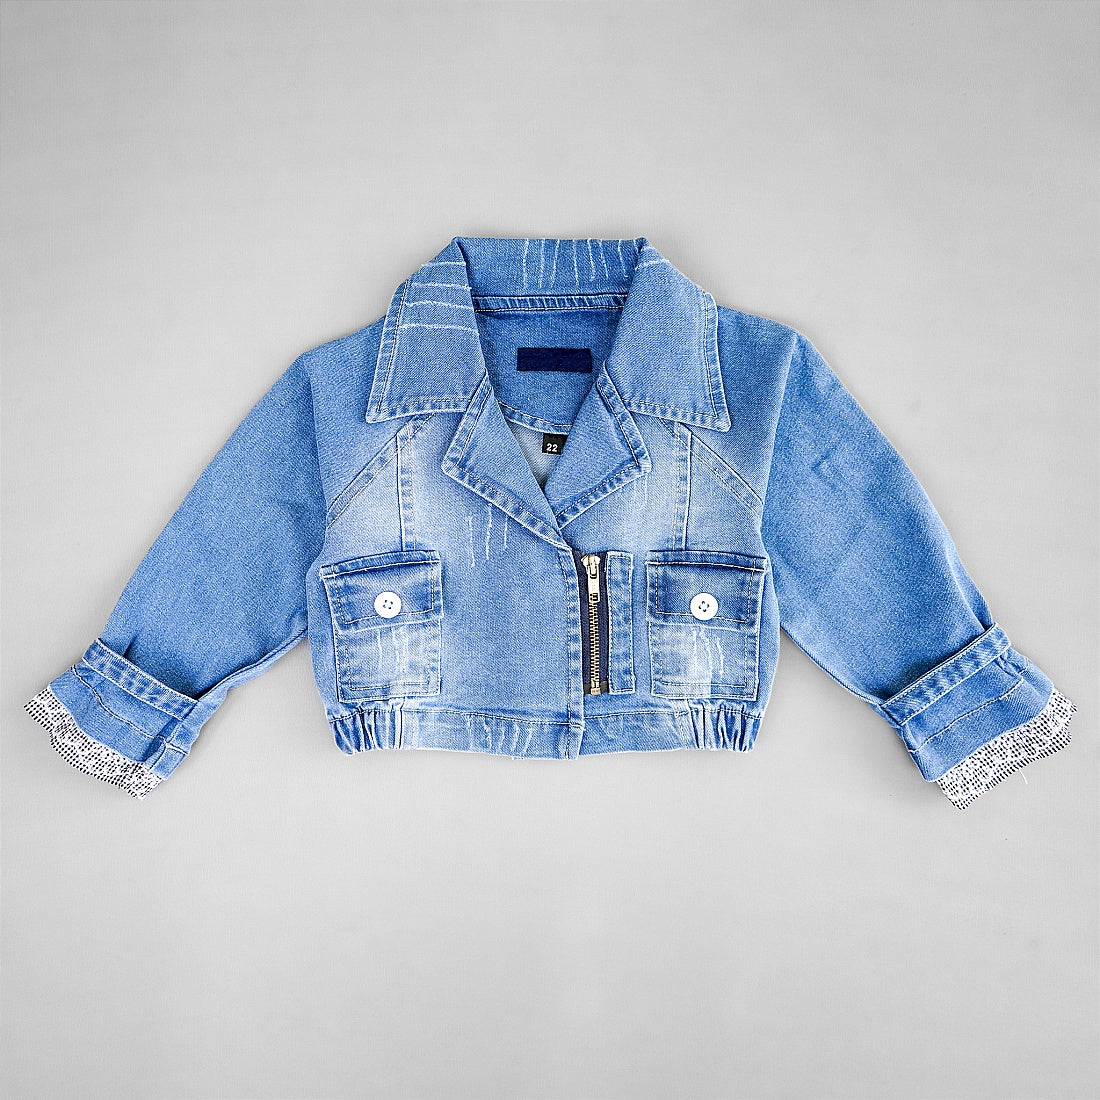 Five Ways to Wear It - How to Style A Denim Jacket - Get Your Pretty On®